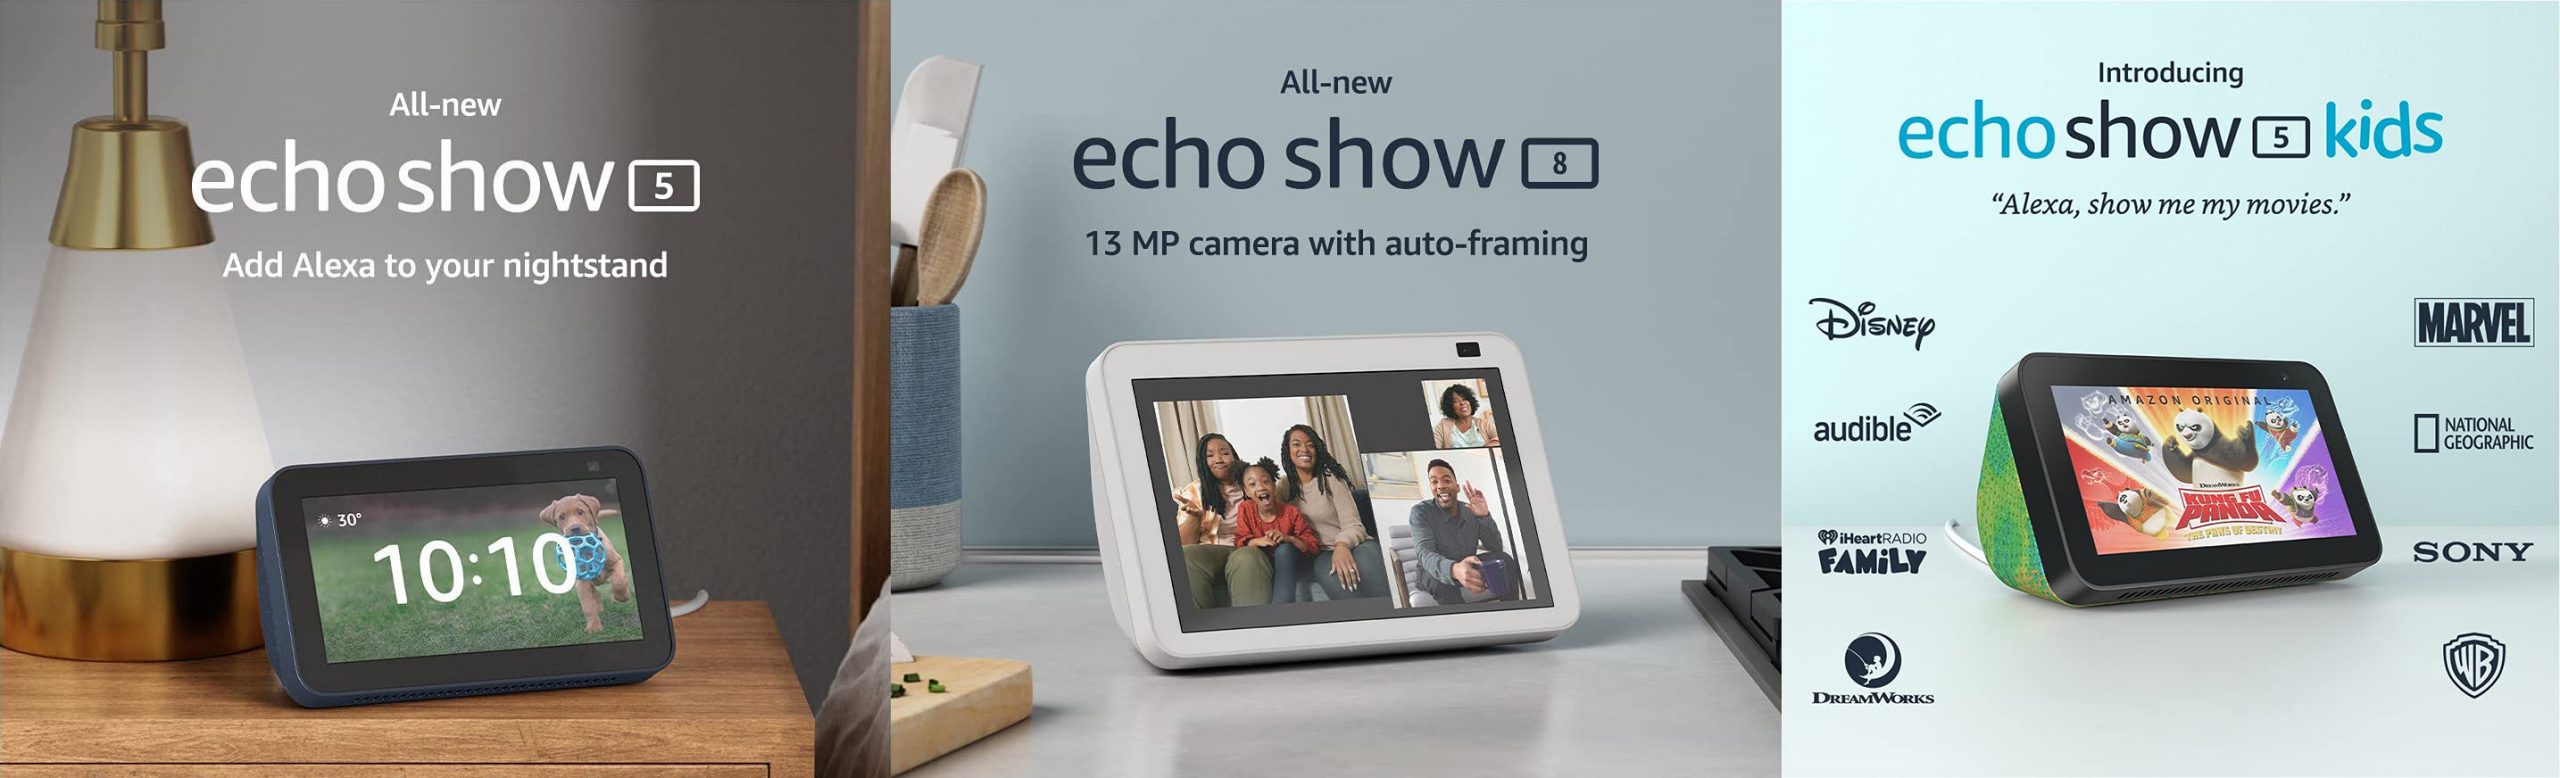 Amazon update Echo Show 5 and 8, plus a new Echo Show 5 Kids edition